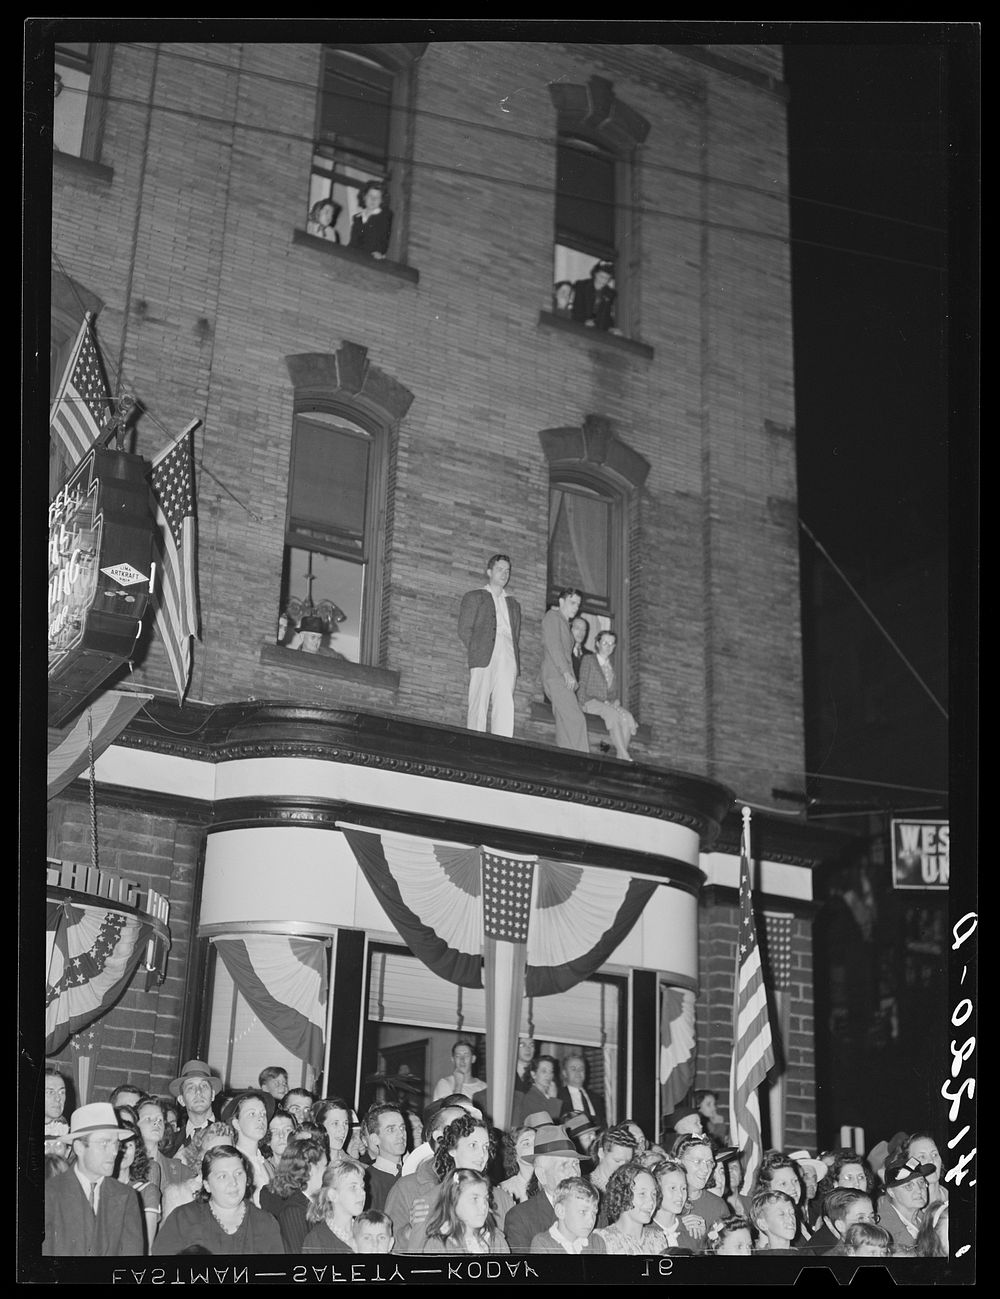 Spectators at labor day parade in Du Bois, Pennsylvania. Sourced from the Library of Congress.